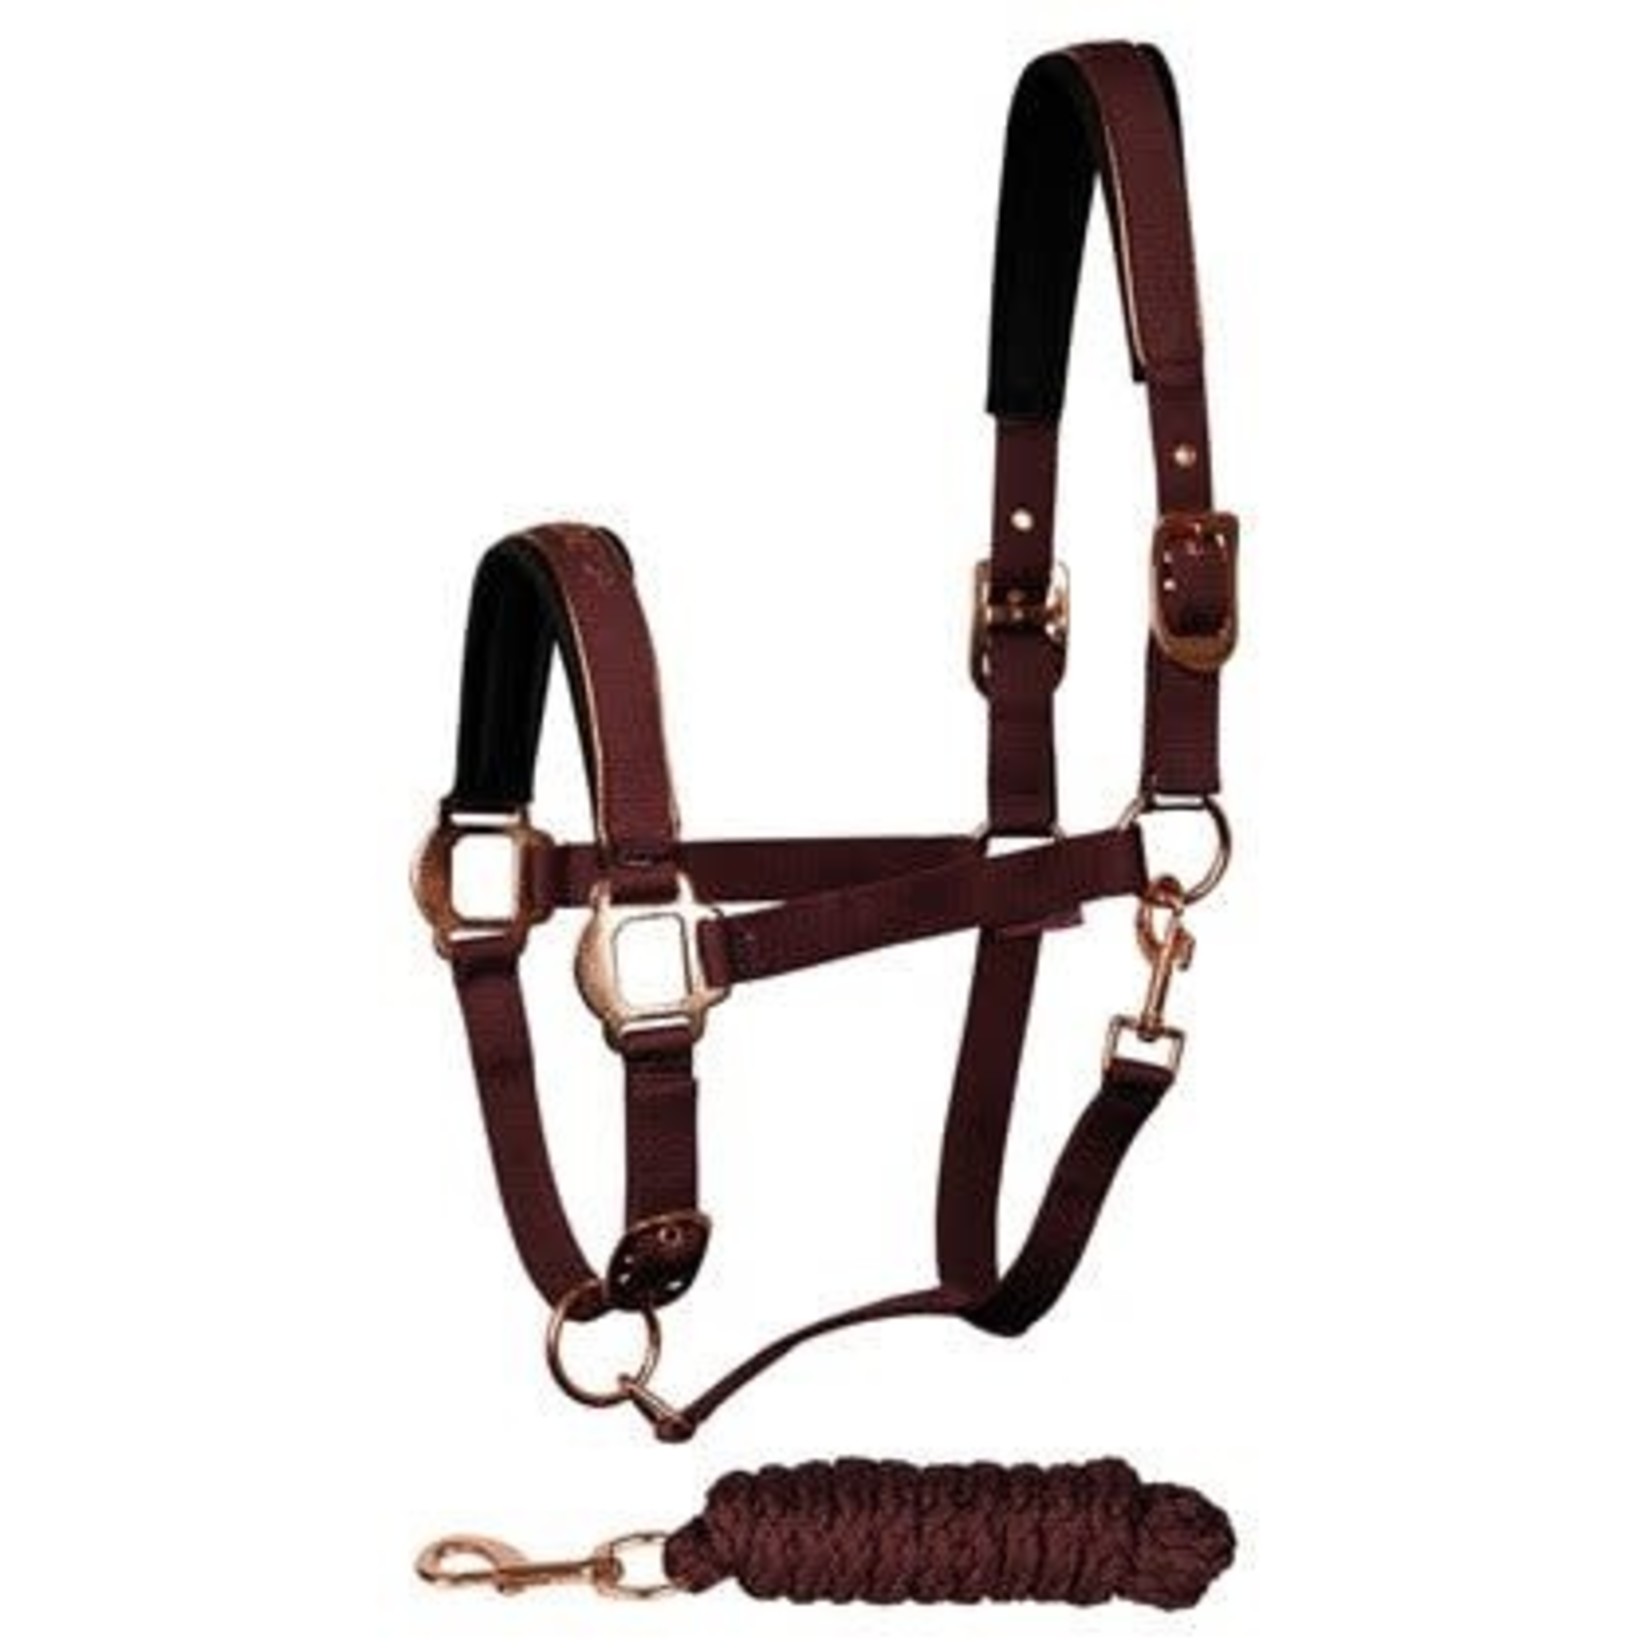 Harry's Horse Harry's Horse Halsterset Just Ride Rosegold, Bordeaux